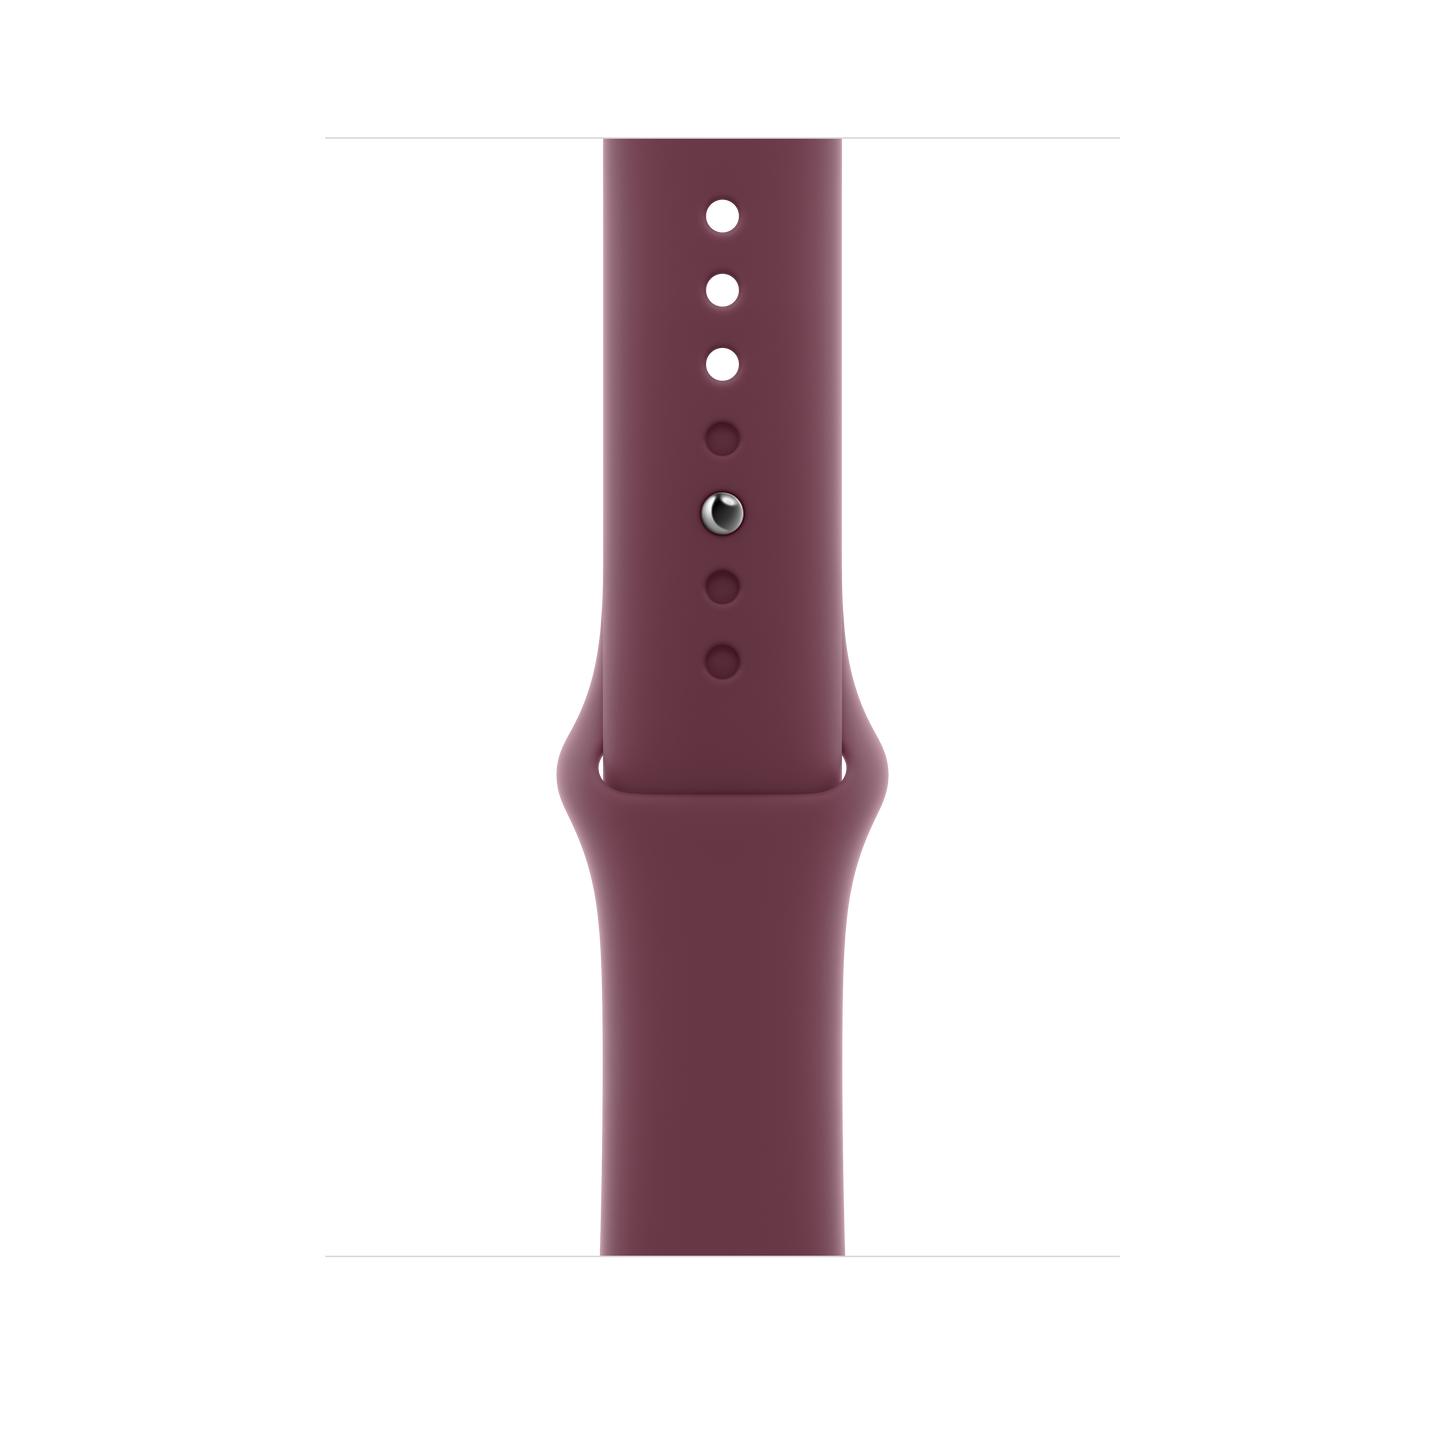 45mm Mulberry Sport Band - S/M